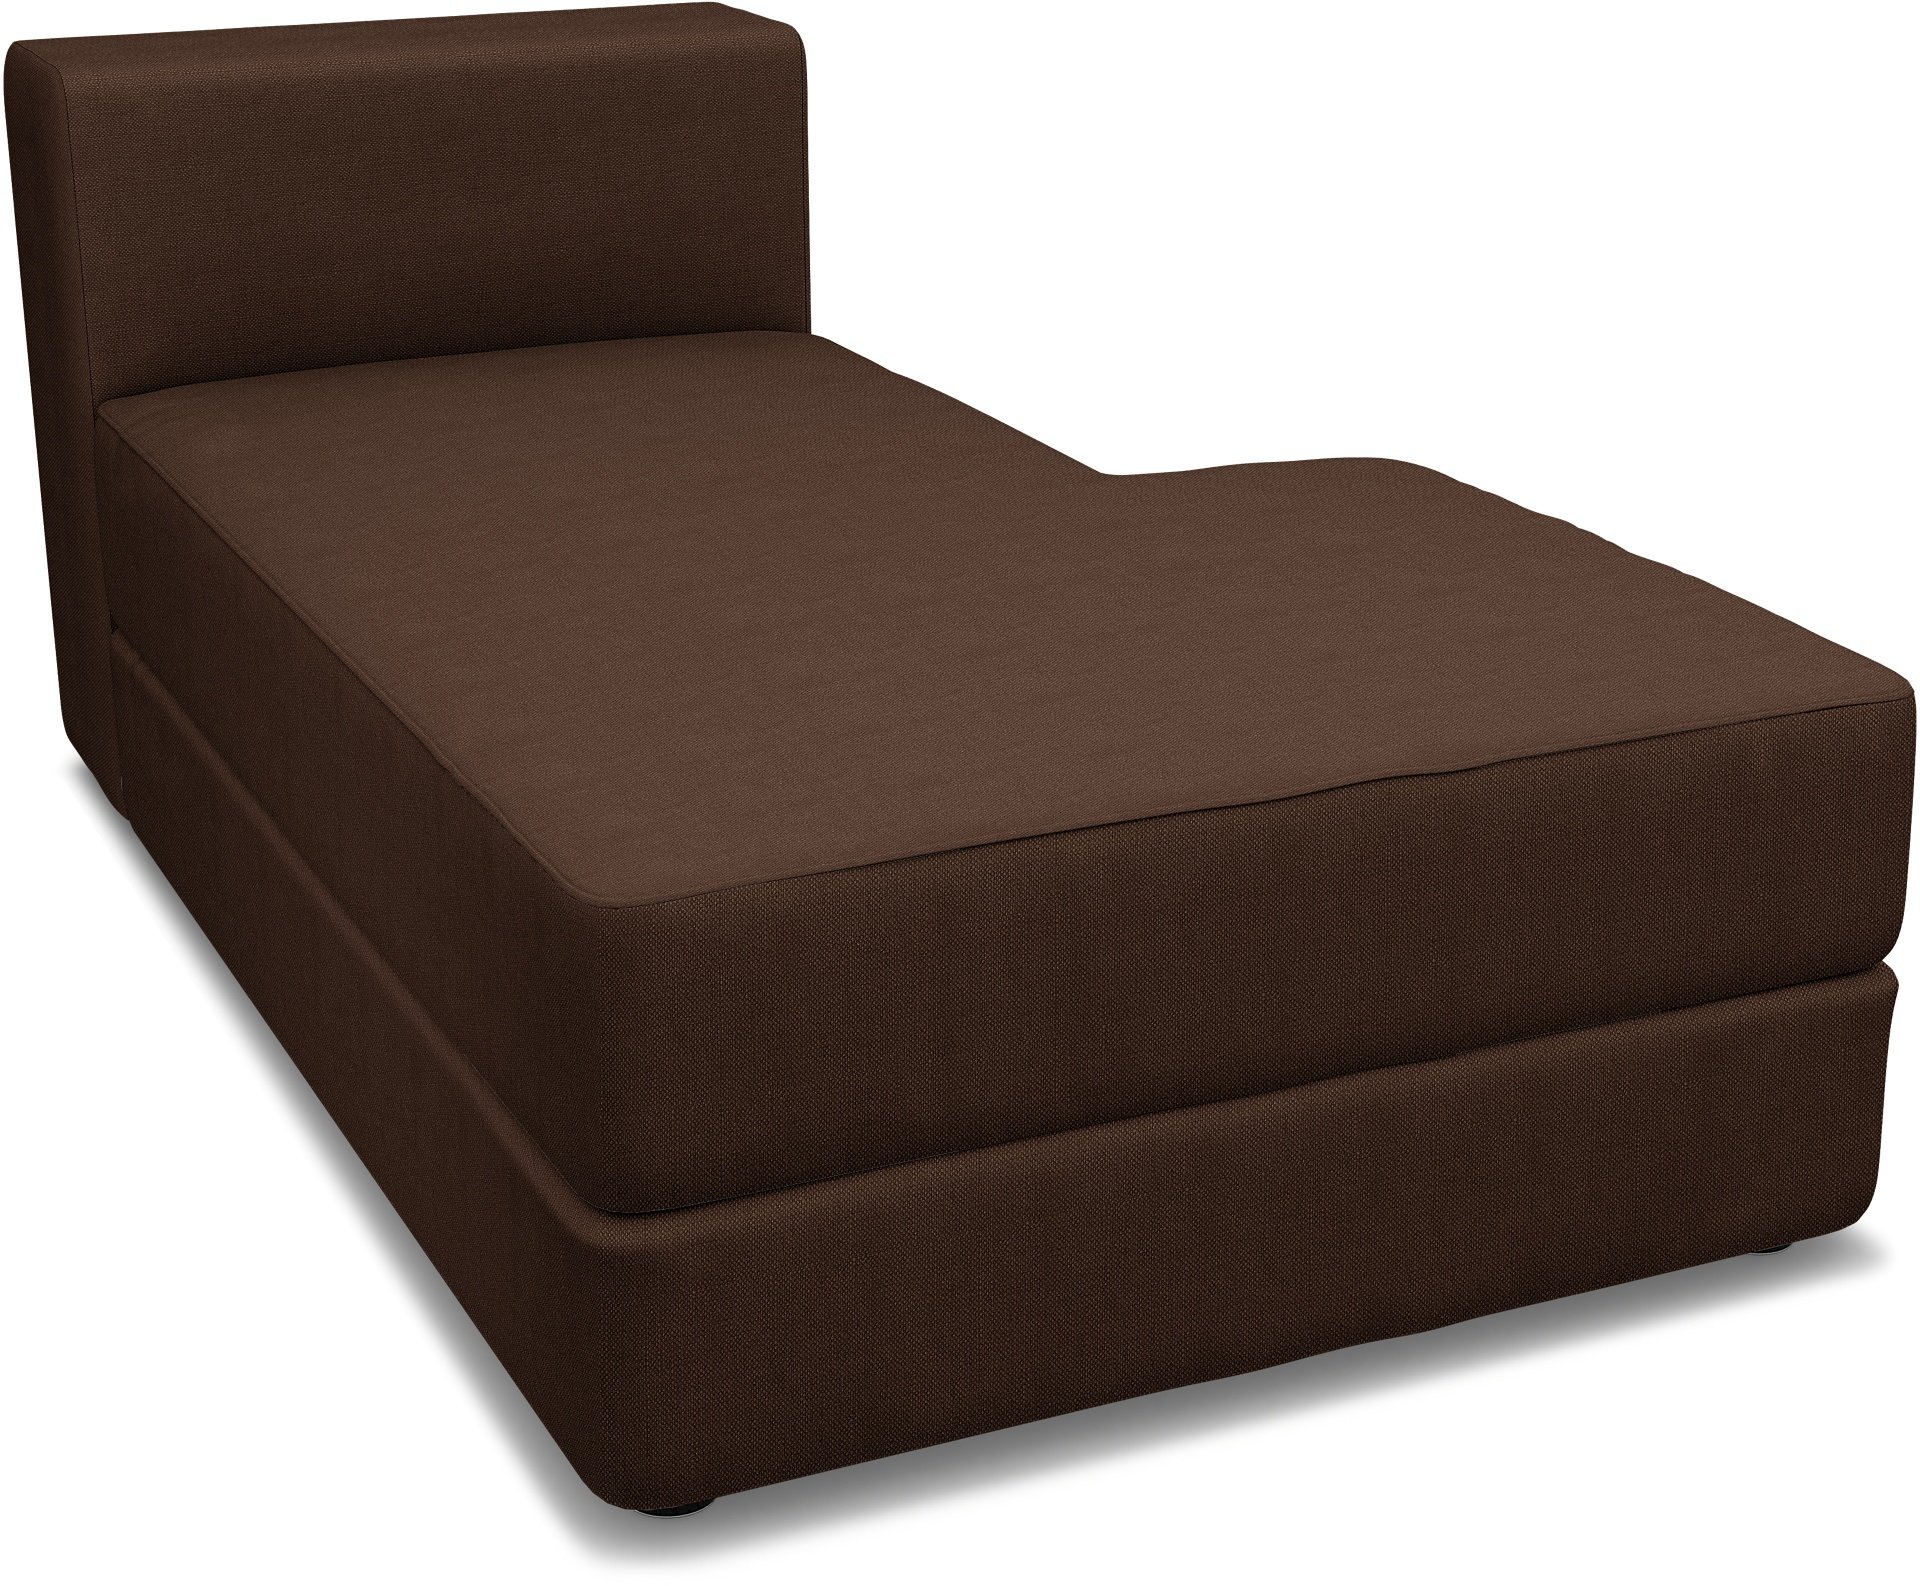 IKEA - Jattebo Chaise Module Cover (right), Chocolate, Linen - Bemz